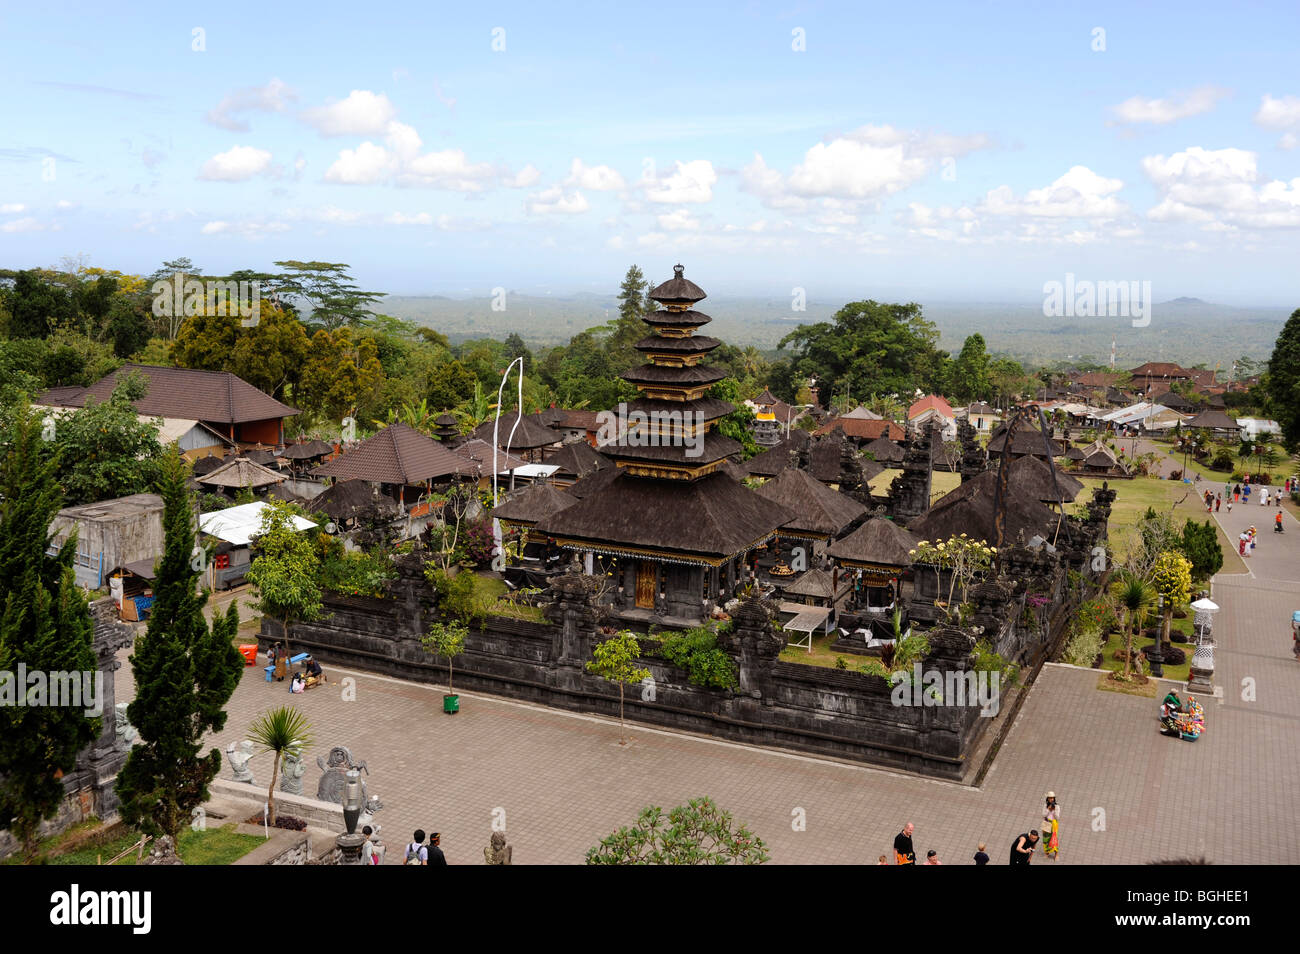 Pura Besakih, high on the slopes of Mt. Agung, is the Mother Temple of Bali, the most important temple complex on the island. Stock Photo